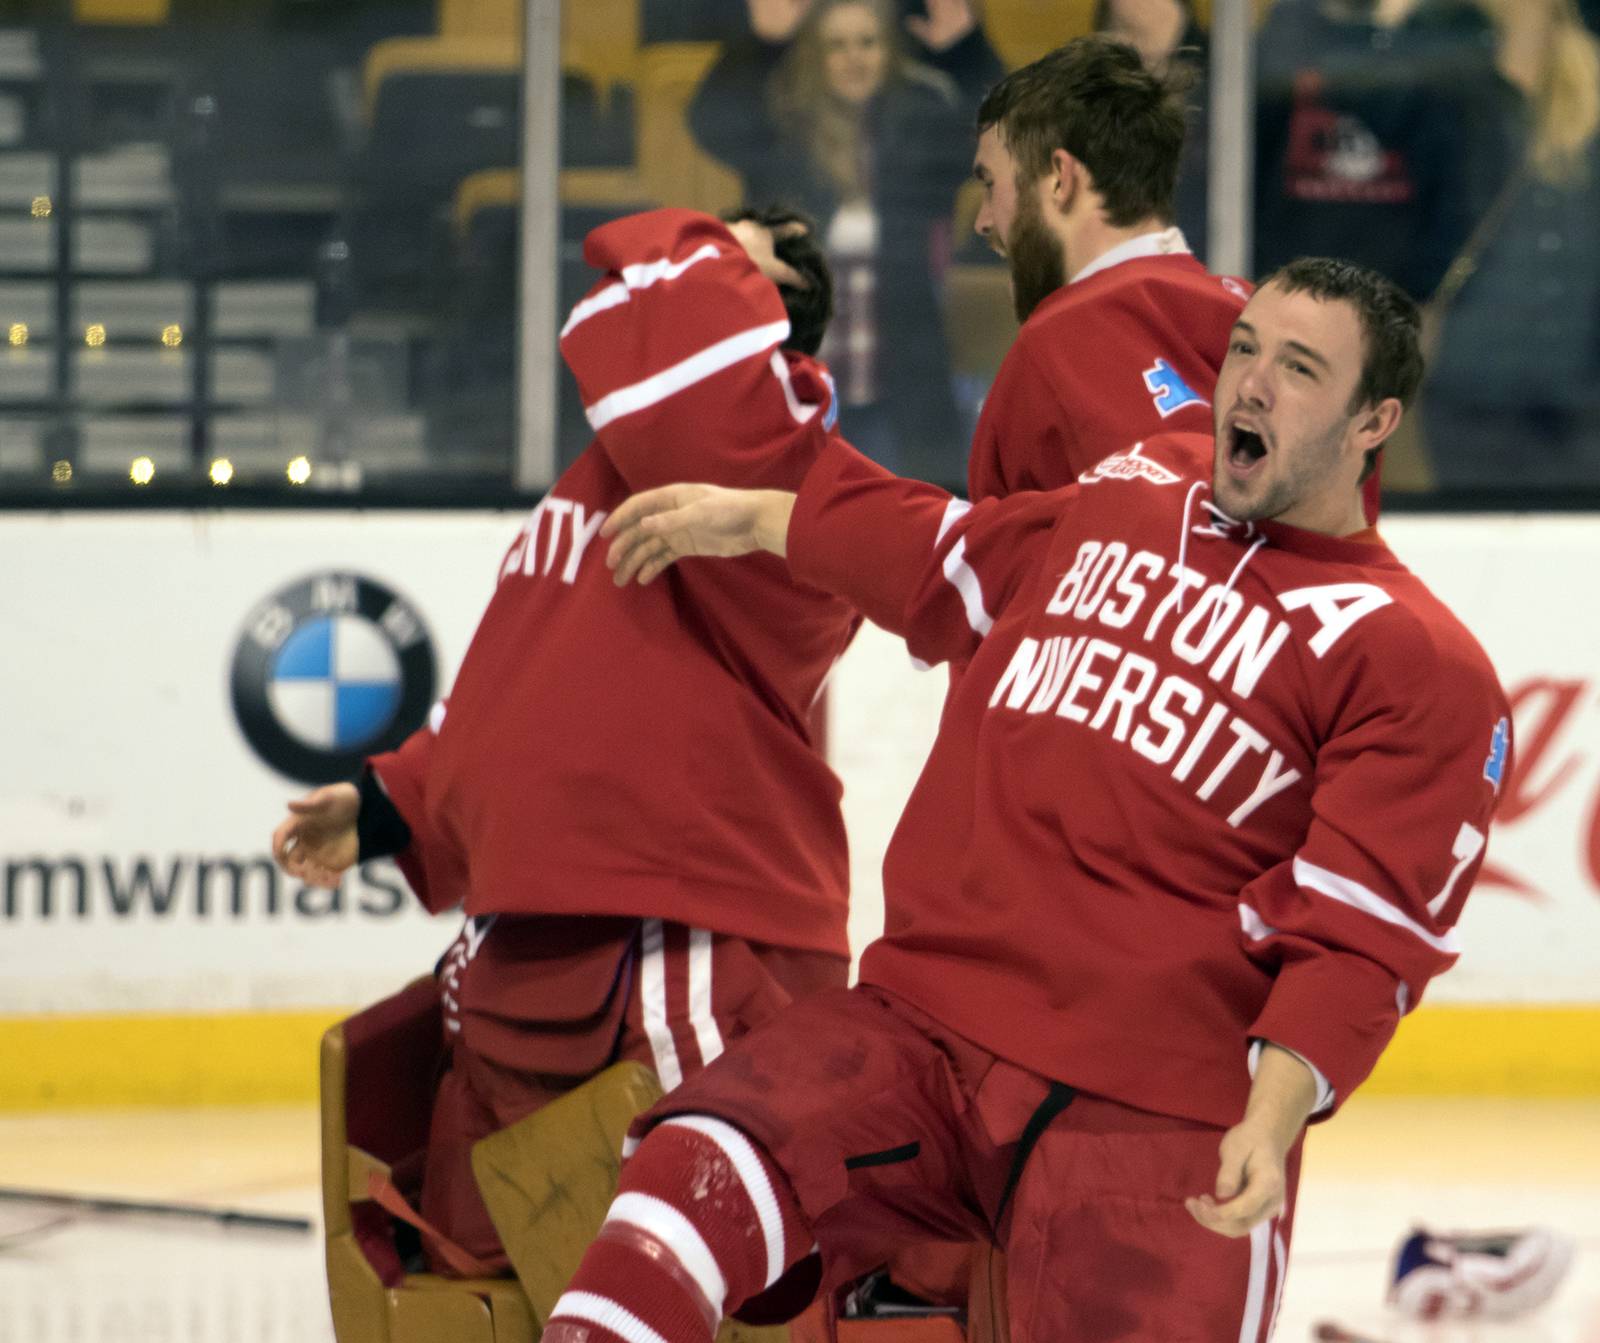 Cason Hohmann rejoices following BU's 4-3 victory over crosstown rival Northeastern University in Monday's Beanpot final at TD Garden.  PHOTO BY JUSTIN HAWK/DAILY FREE PRESS STAFF